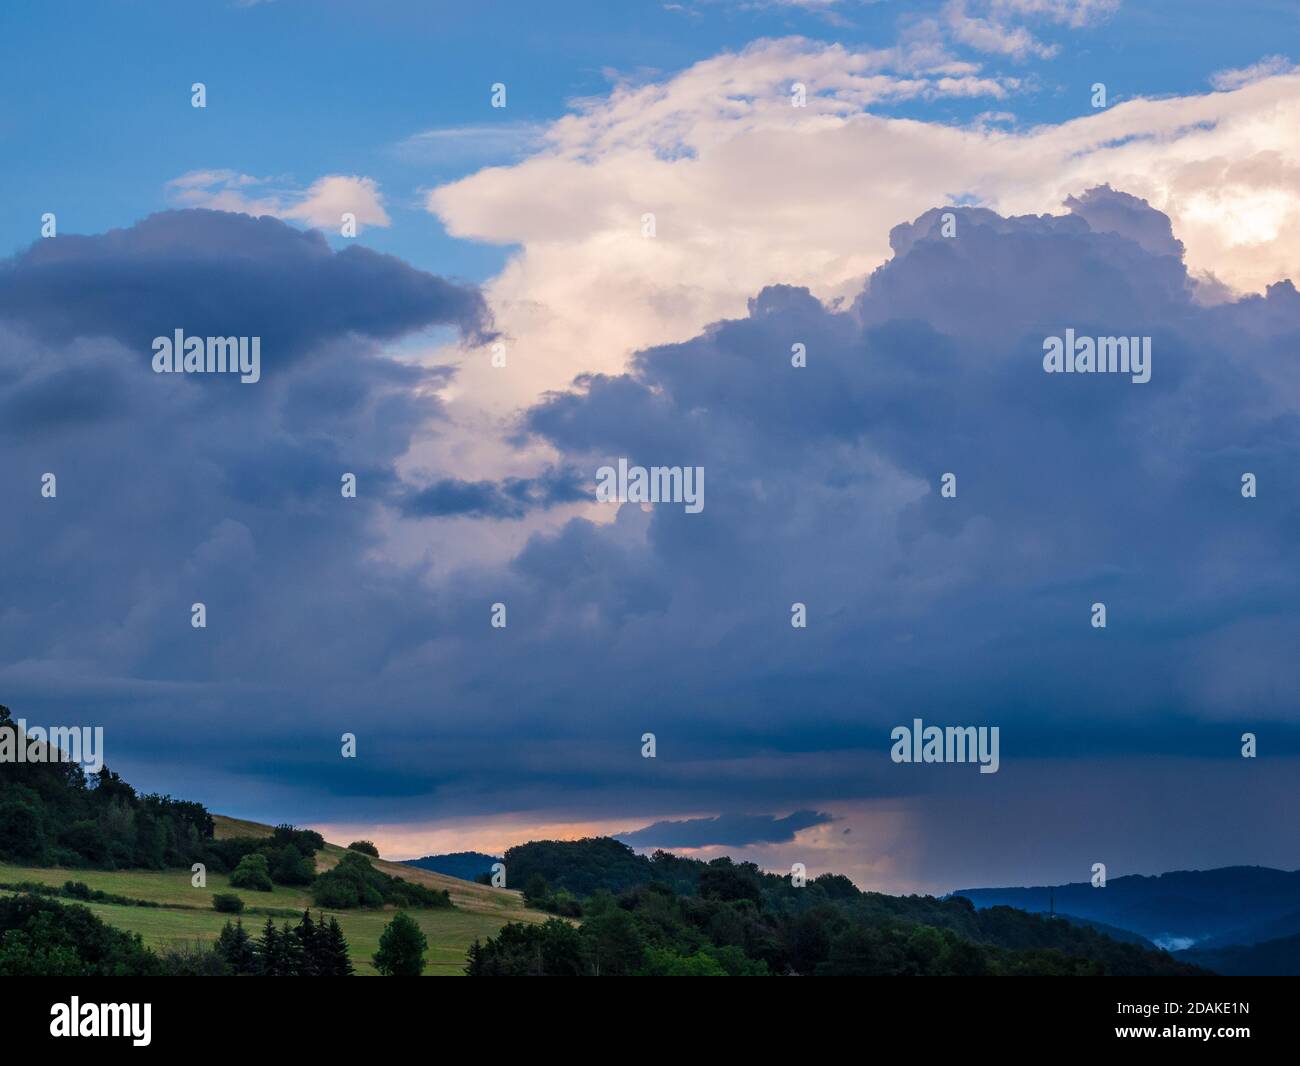 Massive storm clouds in the sky over hilly landscape Stock Photo